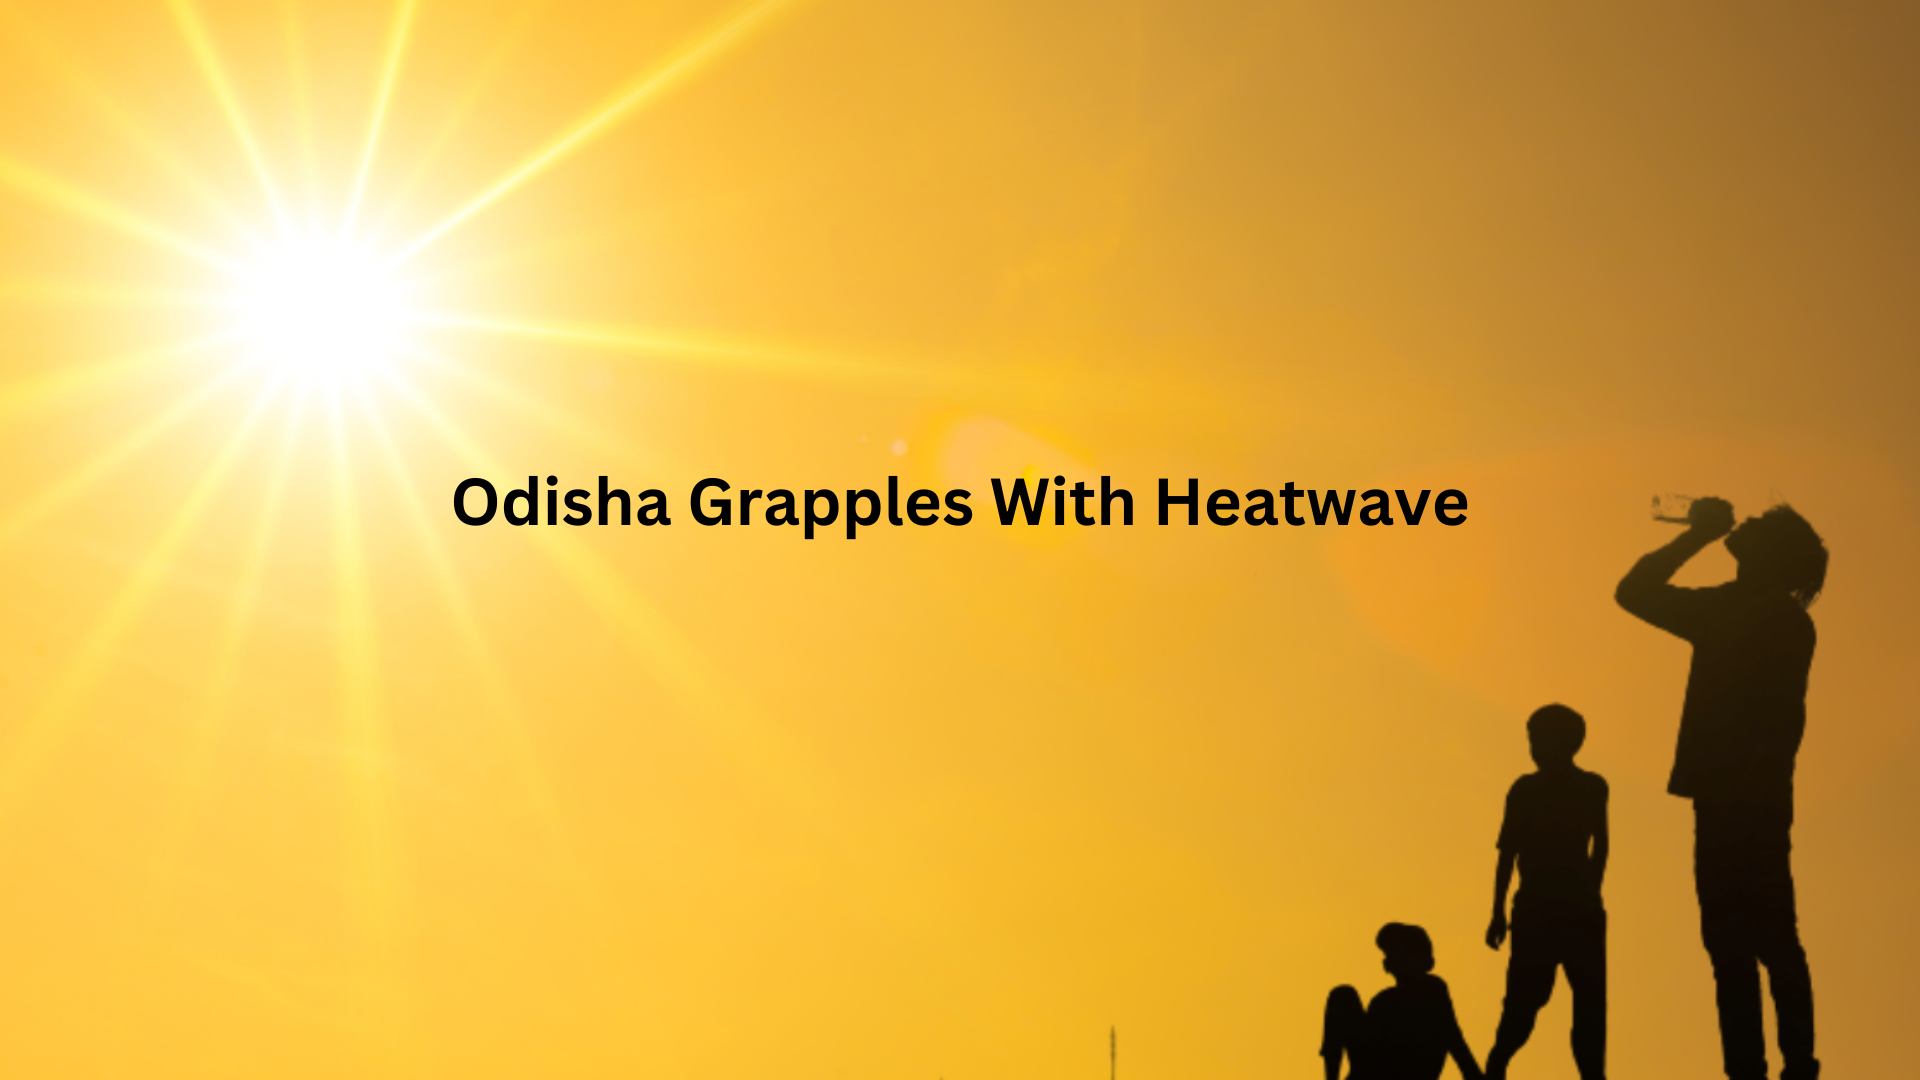 Odisha Grapples With Heatwave, Maximum Temperature Expected To Reach 45°C